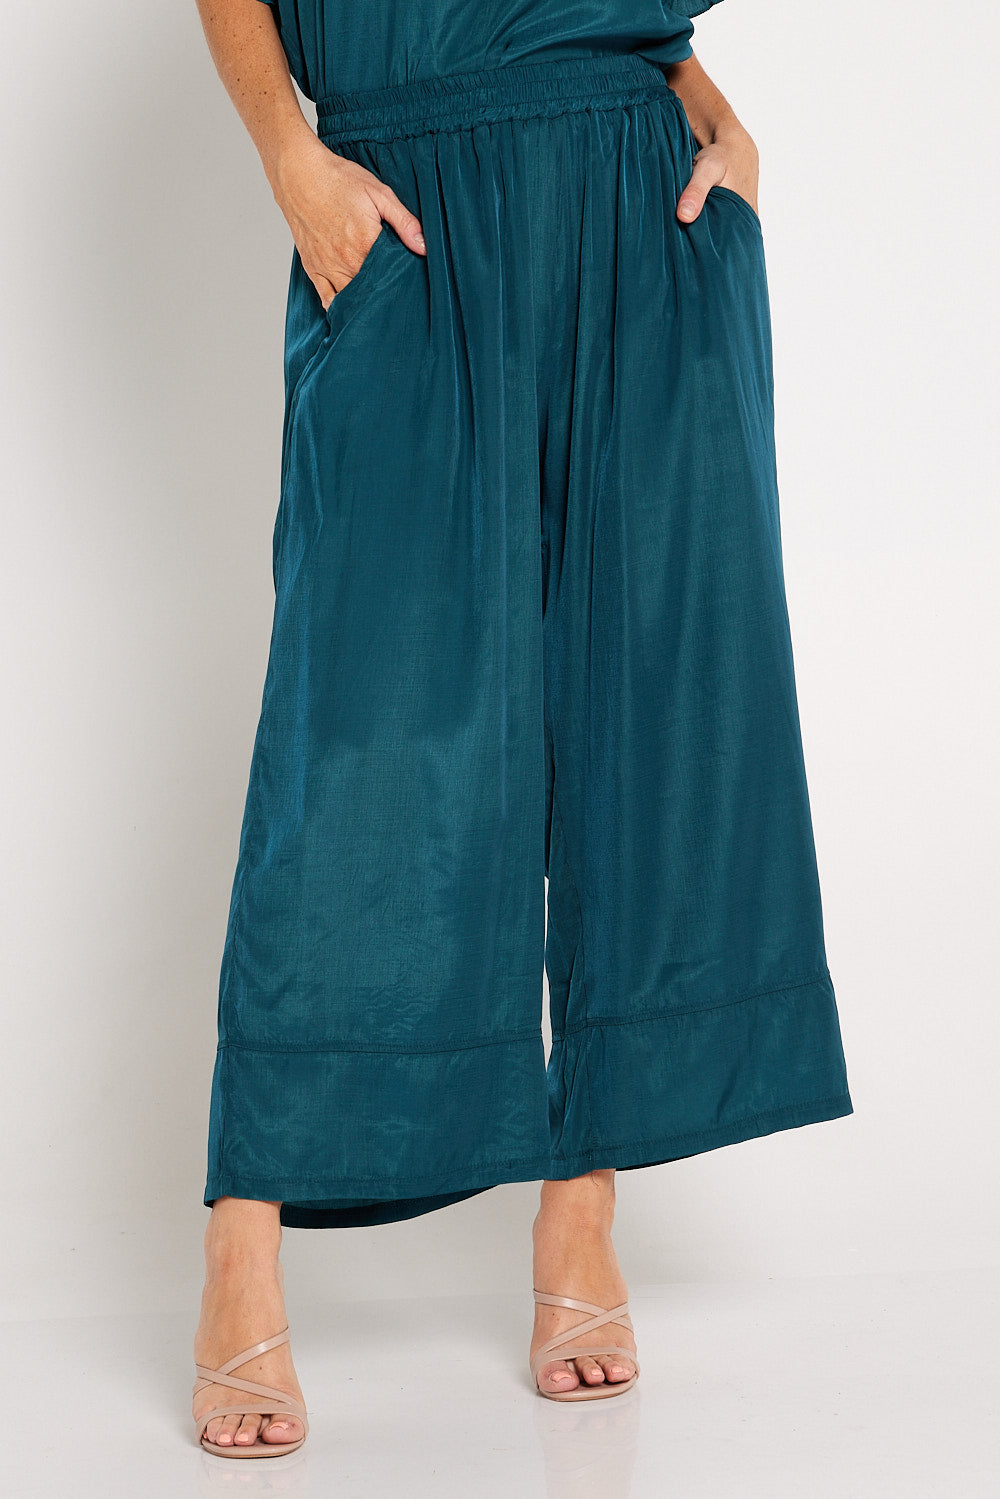 Robyn Pants - Teal | Cotton Village Evening Clothes for Women – TULIO ...